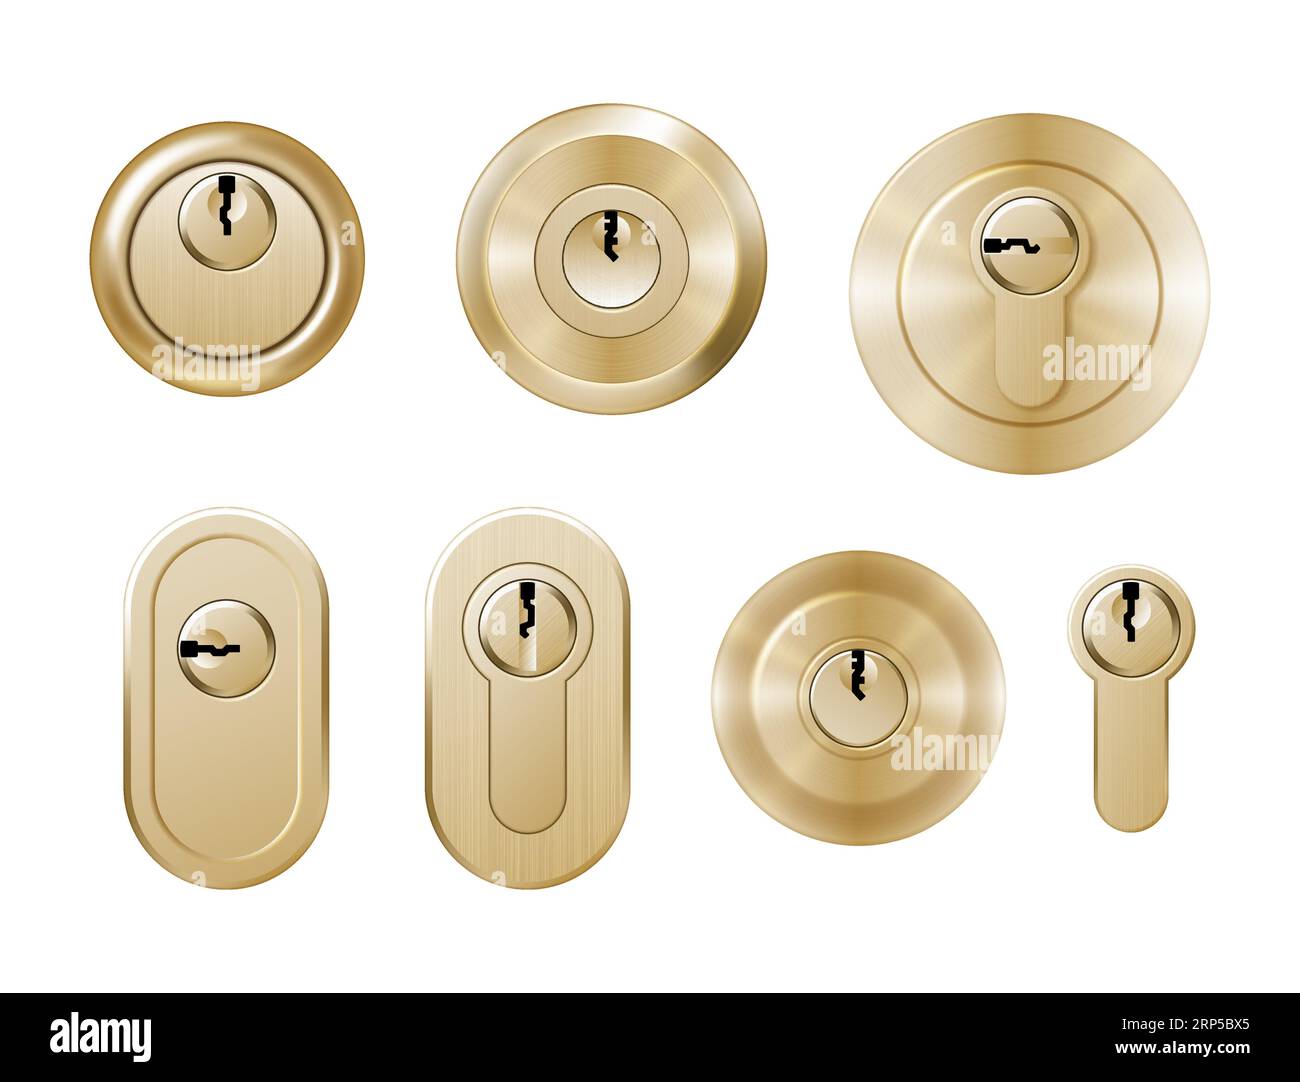 Locks with Keys and Closed Padlocks in Different Shapes Collection Stock  Vector - Illustration of metal, combination: 171884401